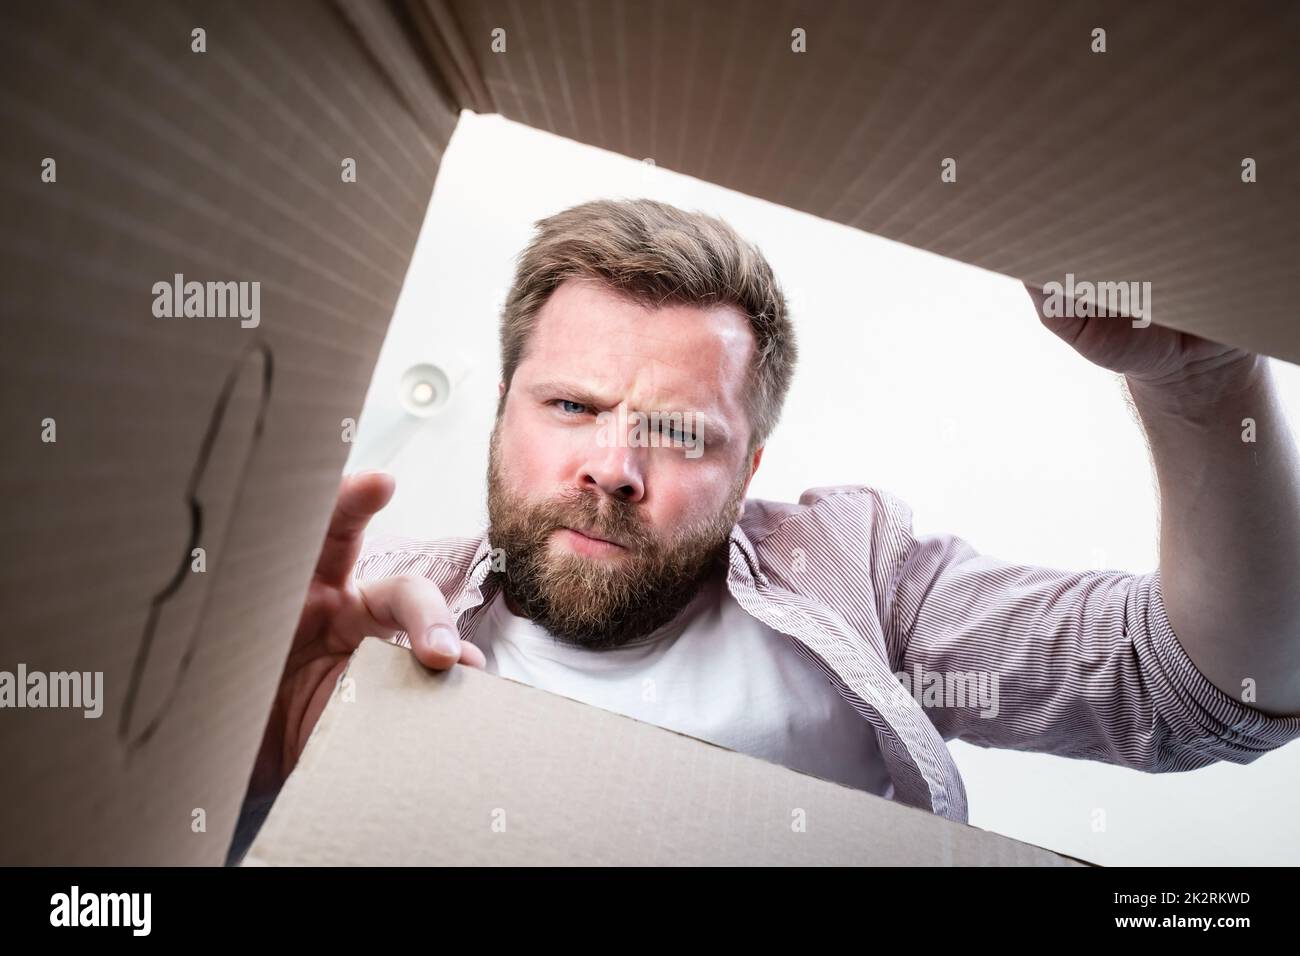 Man unpacked the delivered box with the parcel, he frowns and gets angry, they brought him not what he ordered. Unboxing inside view.  Stock Photo